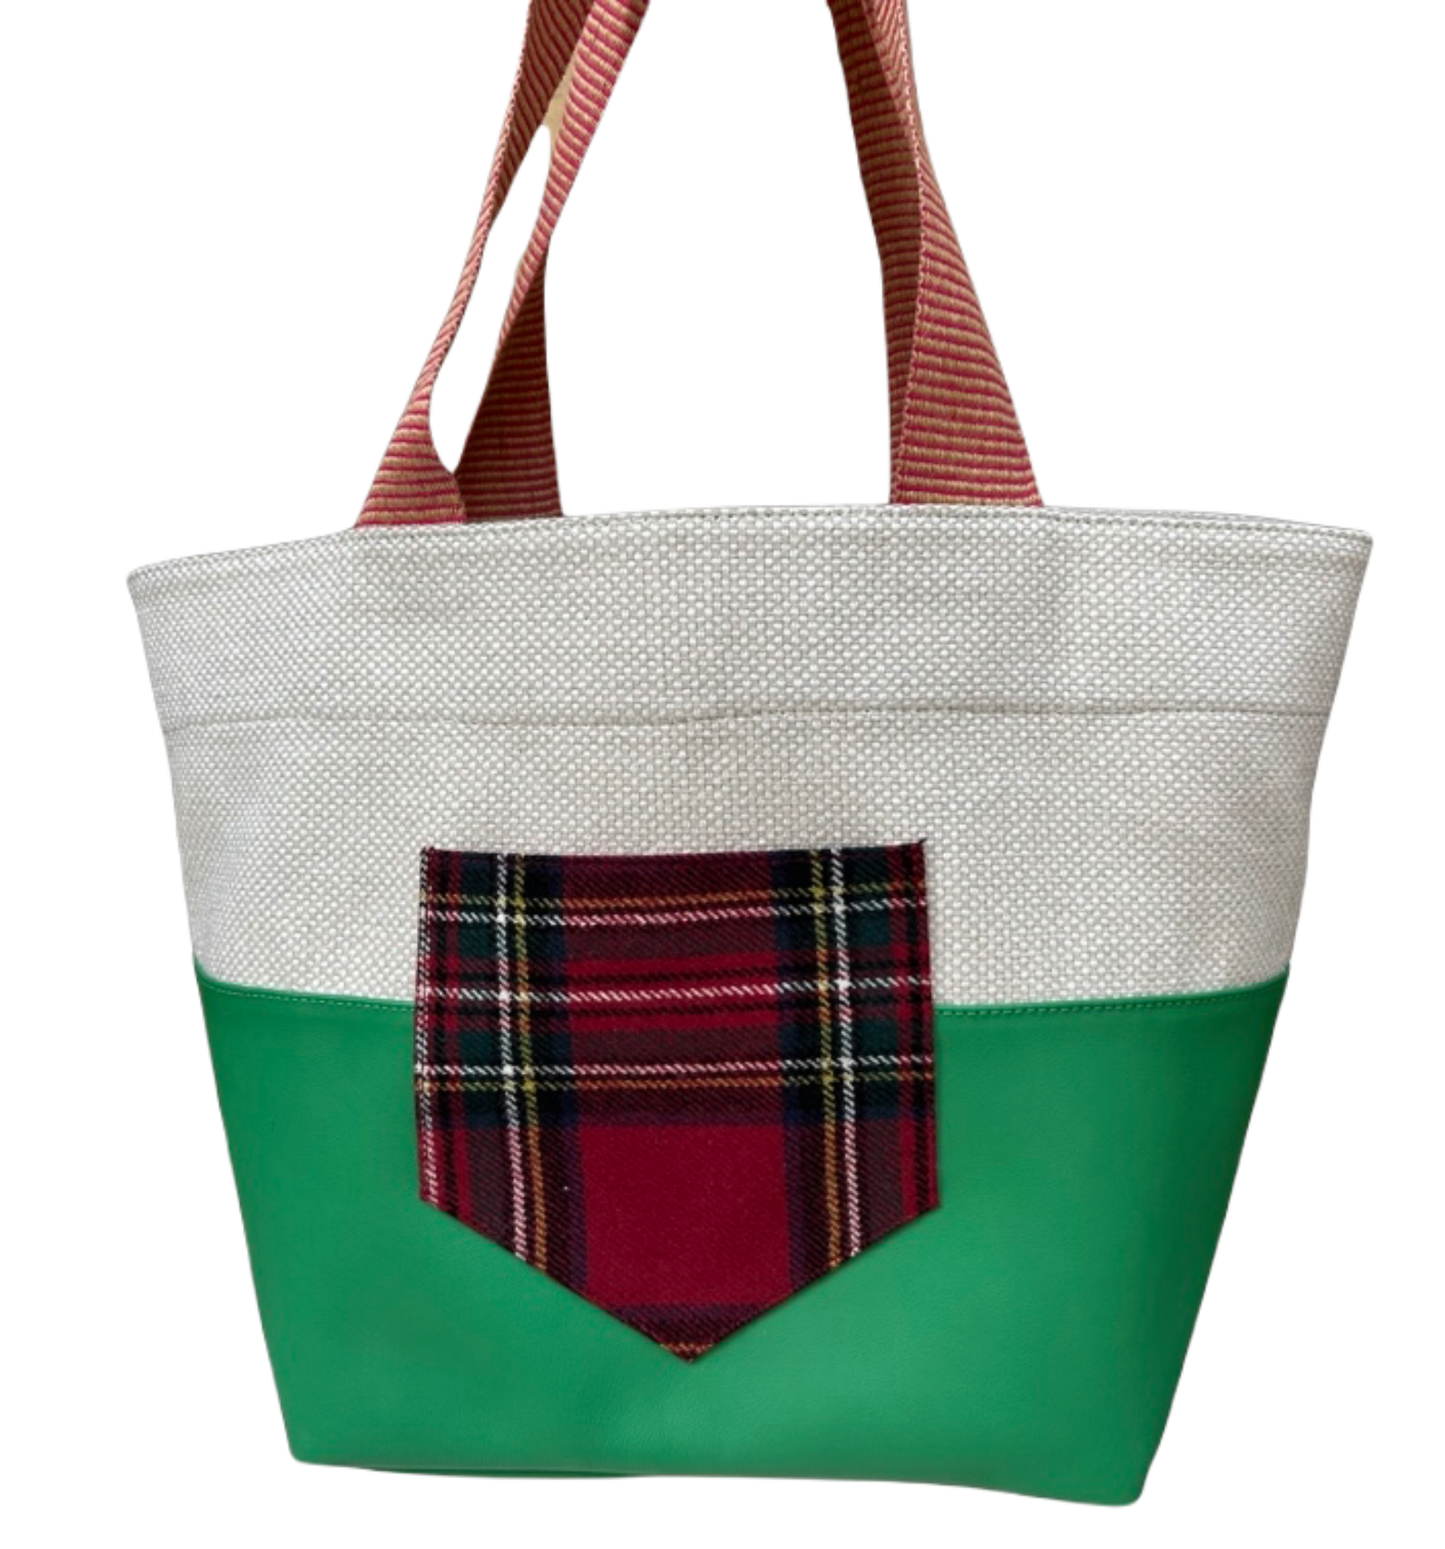 TOTE MEDIUM - LARGE GREEN NEW IN